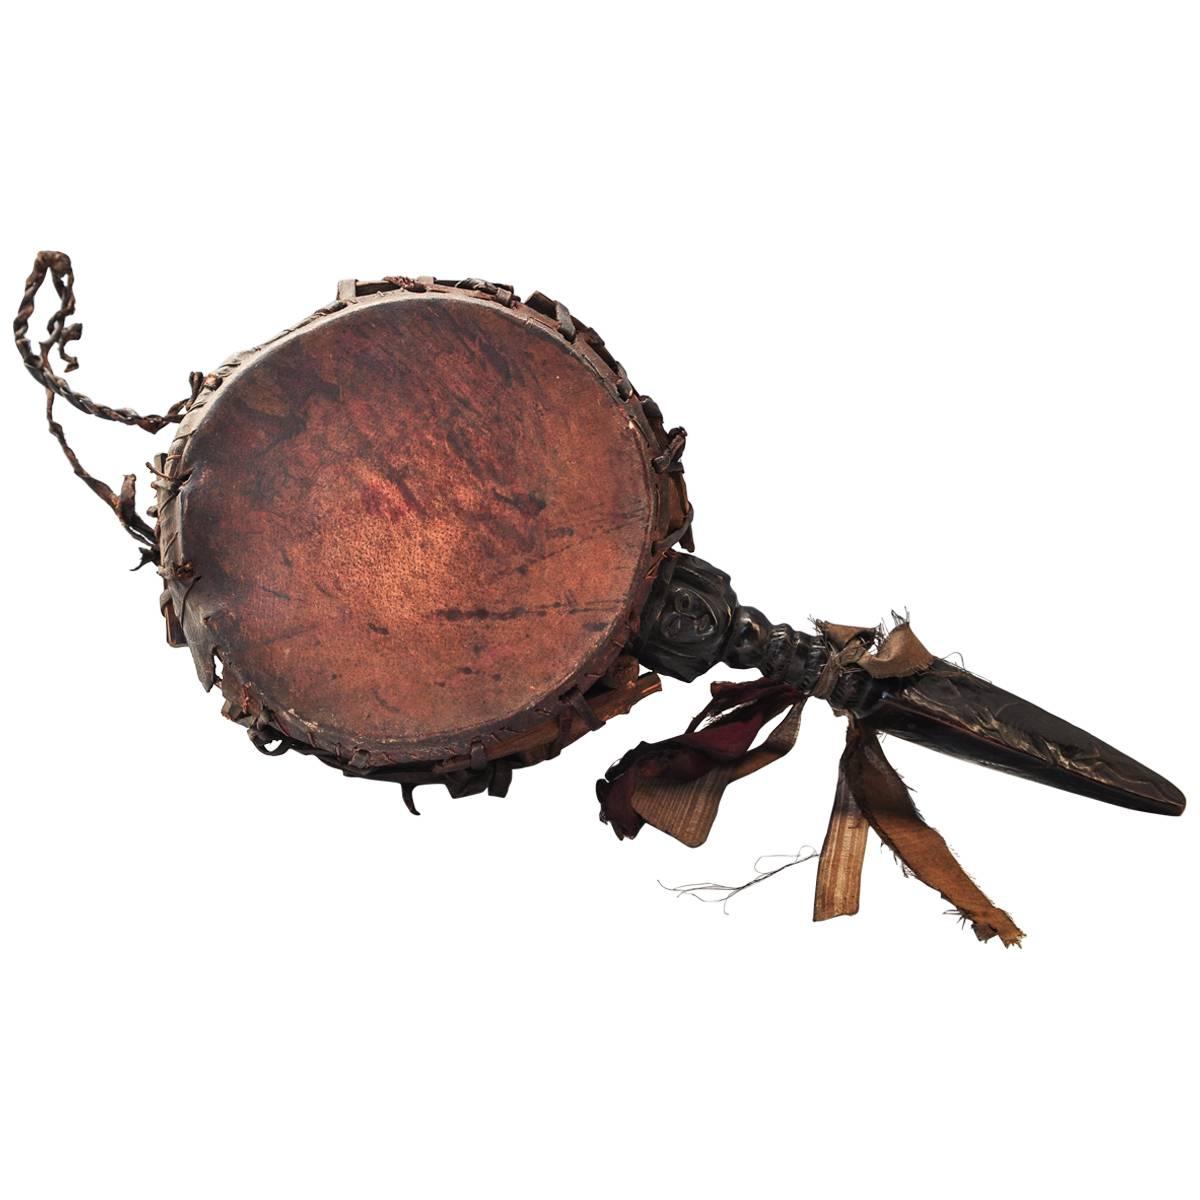 Shaman Drum with Carved Wooden Handle, Nepal Himalaya, Mid-20th Century